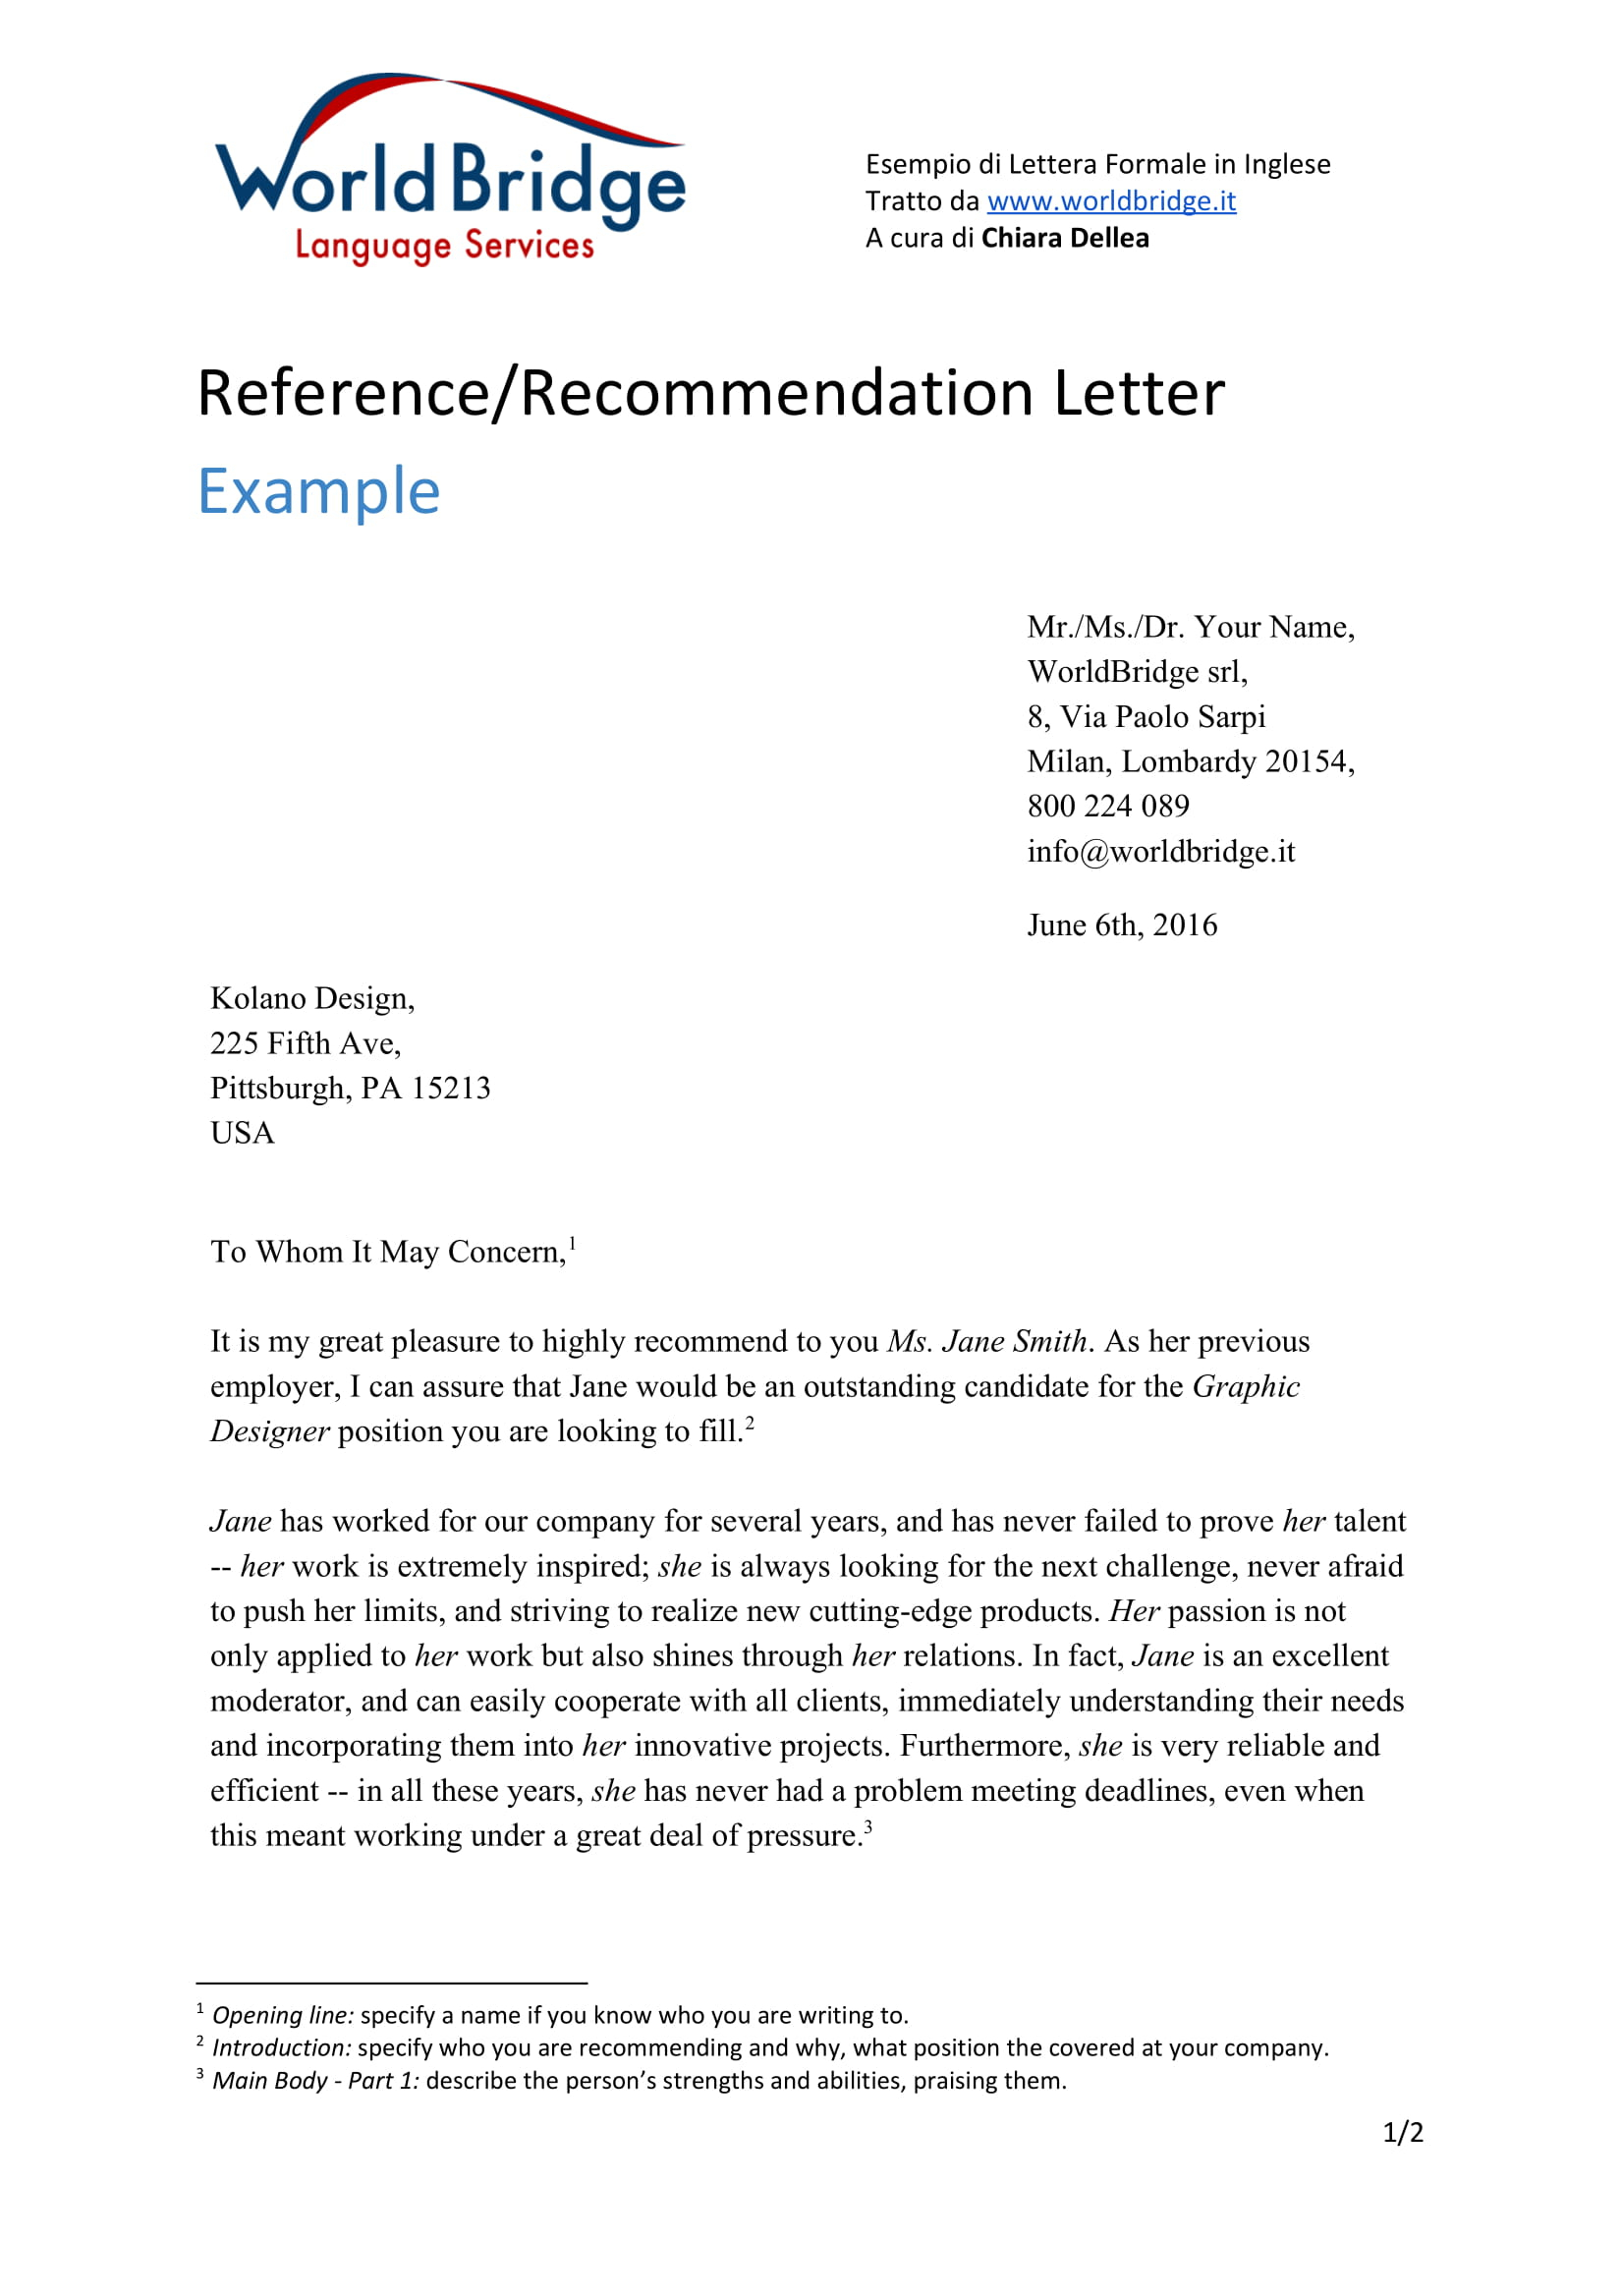 how to ask previous employer for reference letter